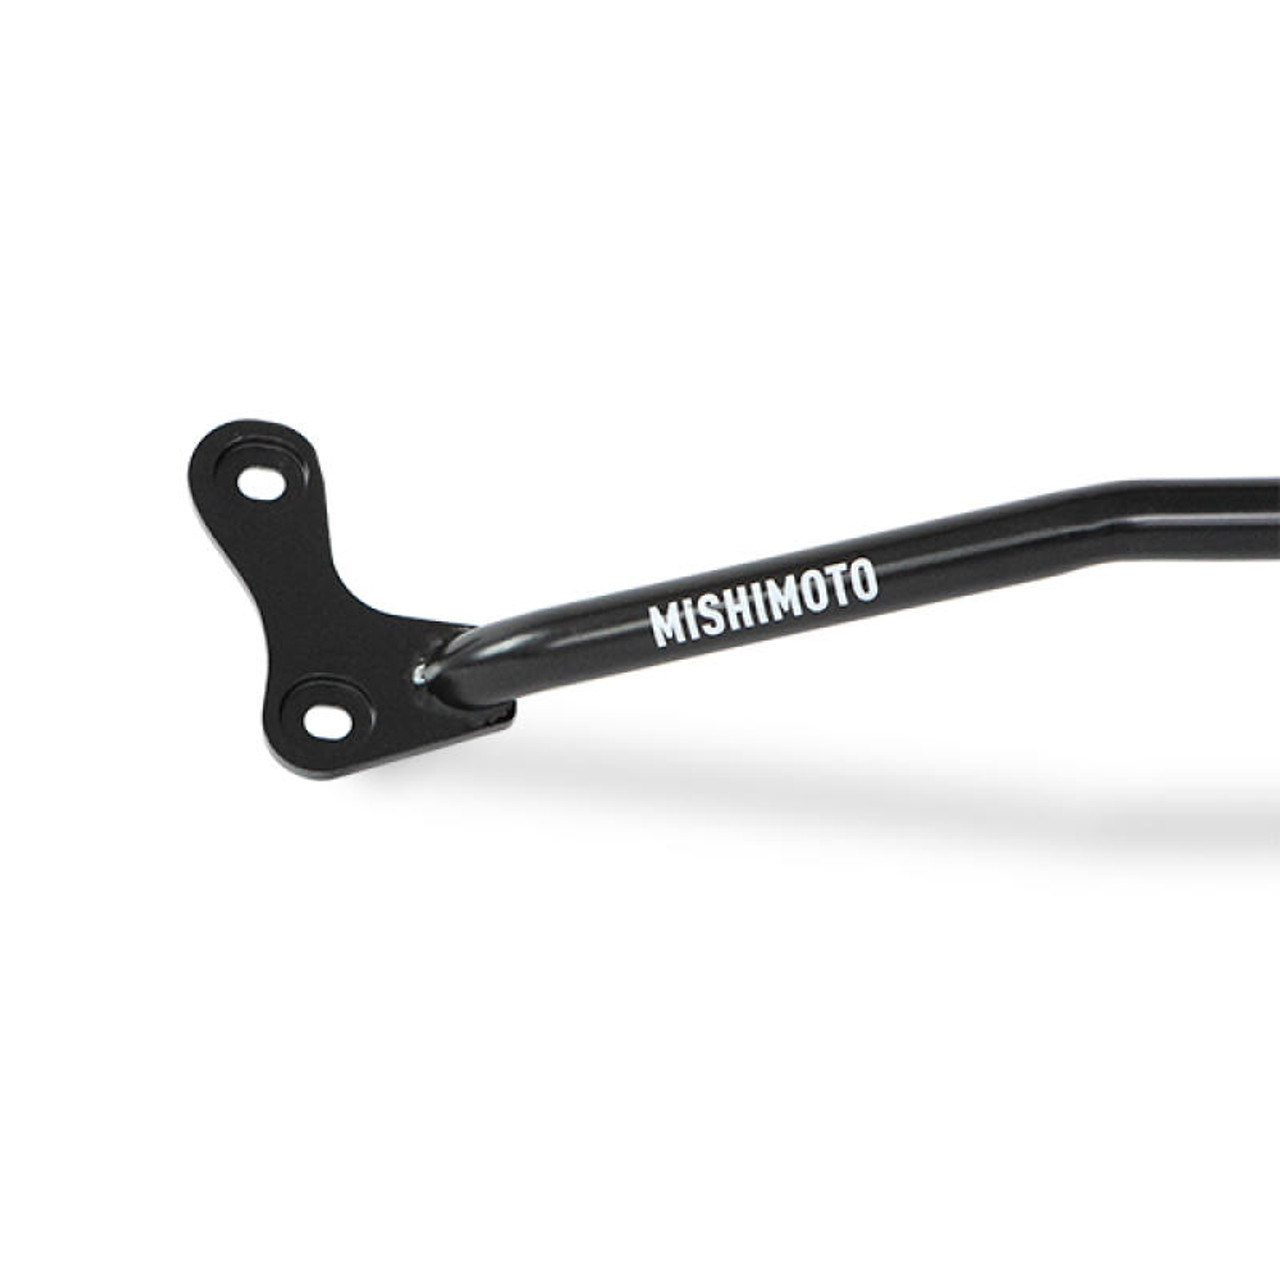 Mishimoto 2015 Ford Mustang Front Strut Tower Brace - MMSTB-MUS-15